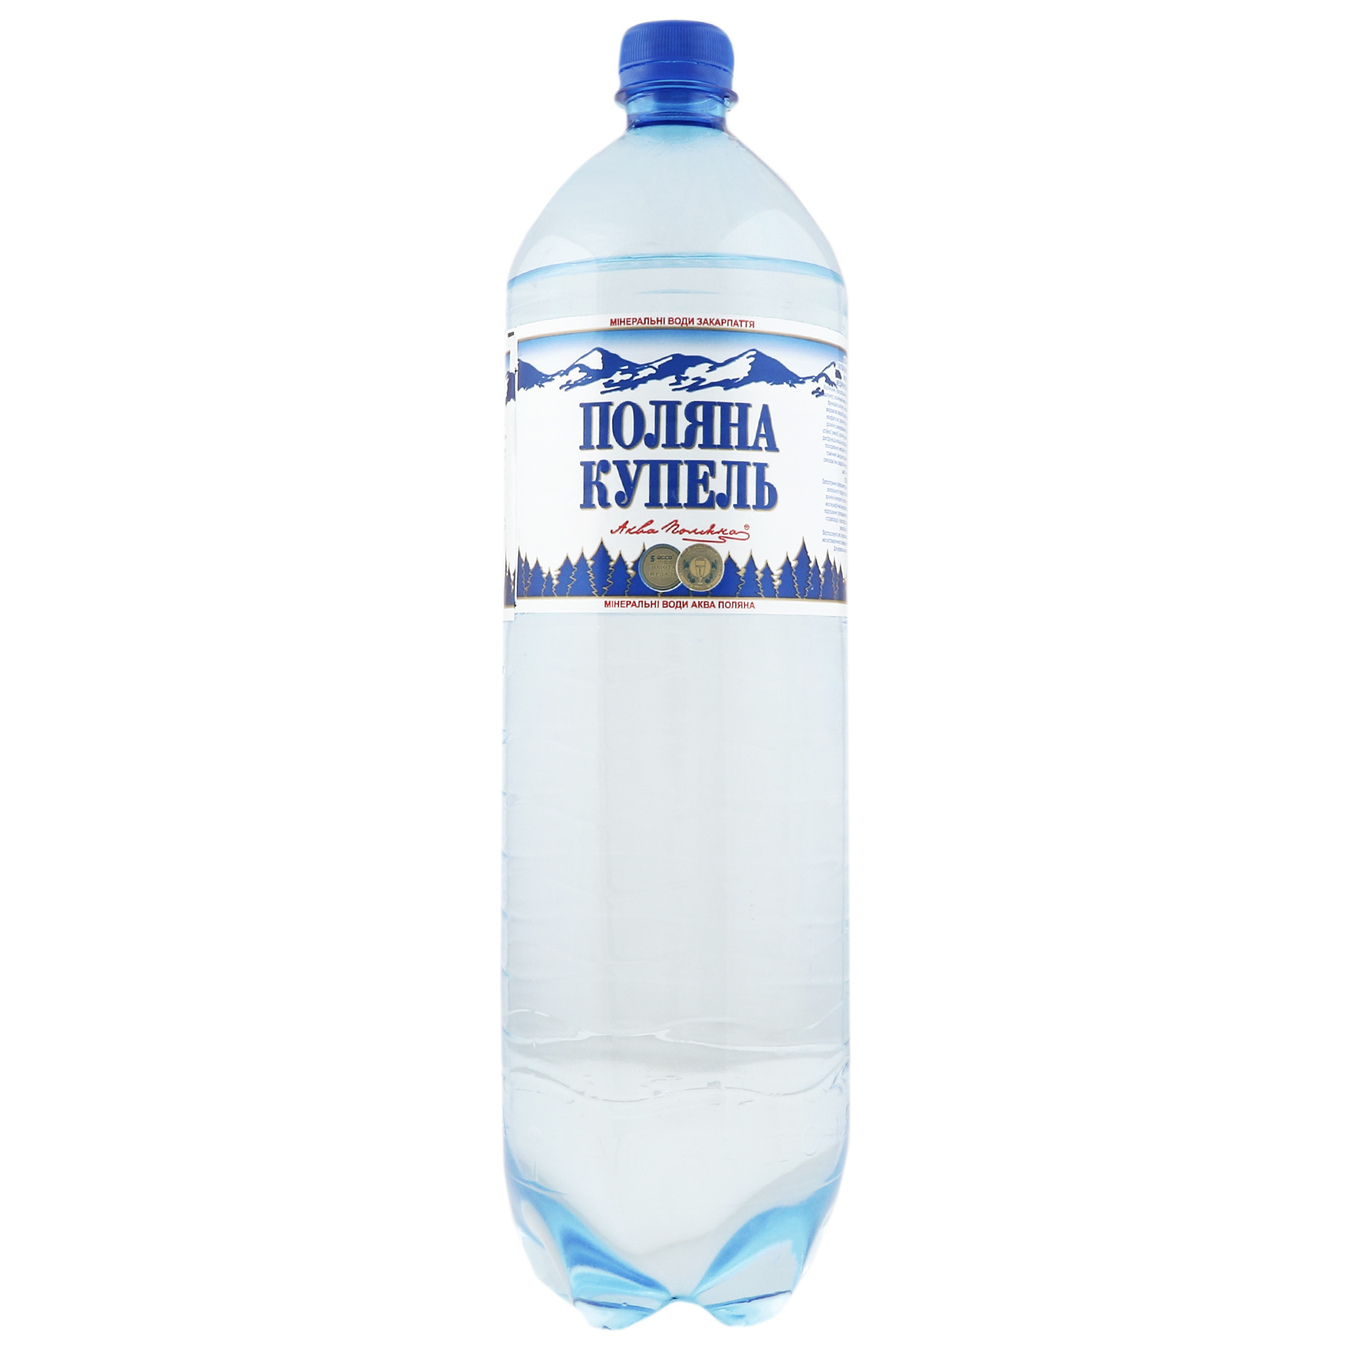 Strong carbonated medical-table water Polyana Kupel 1,5l